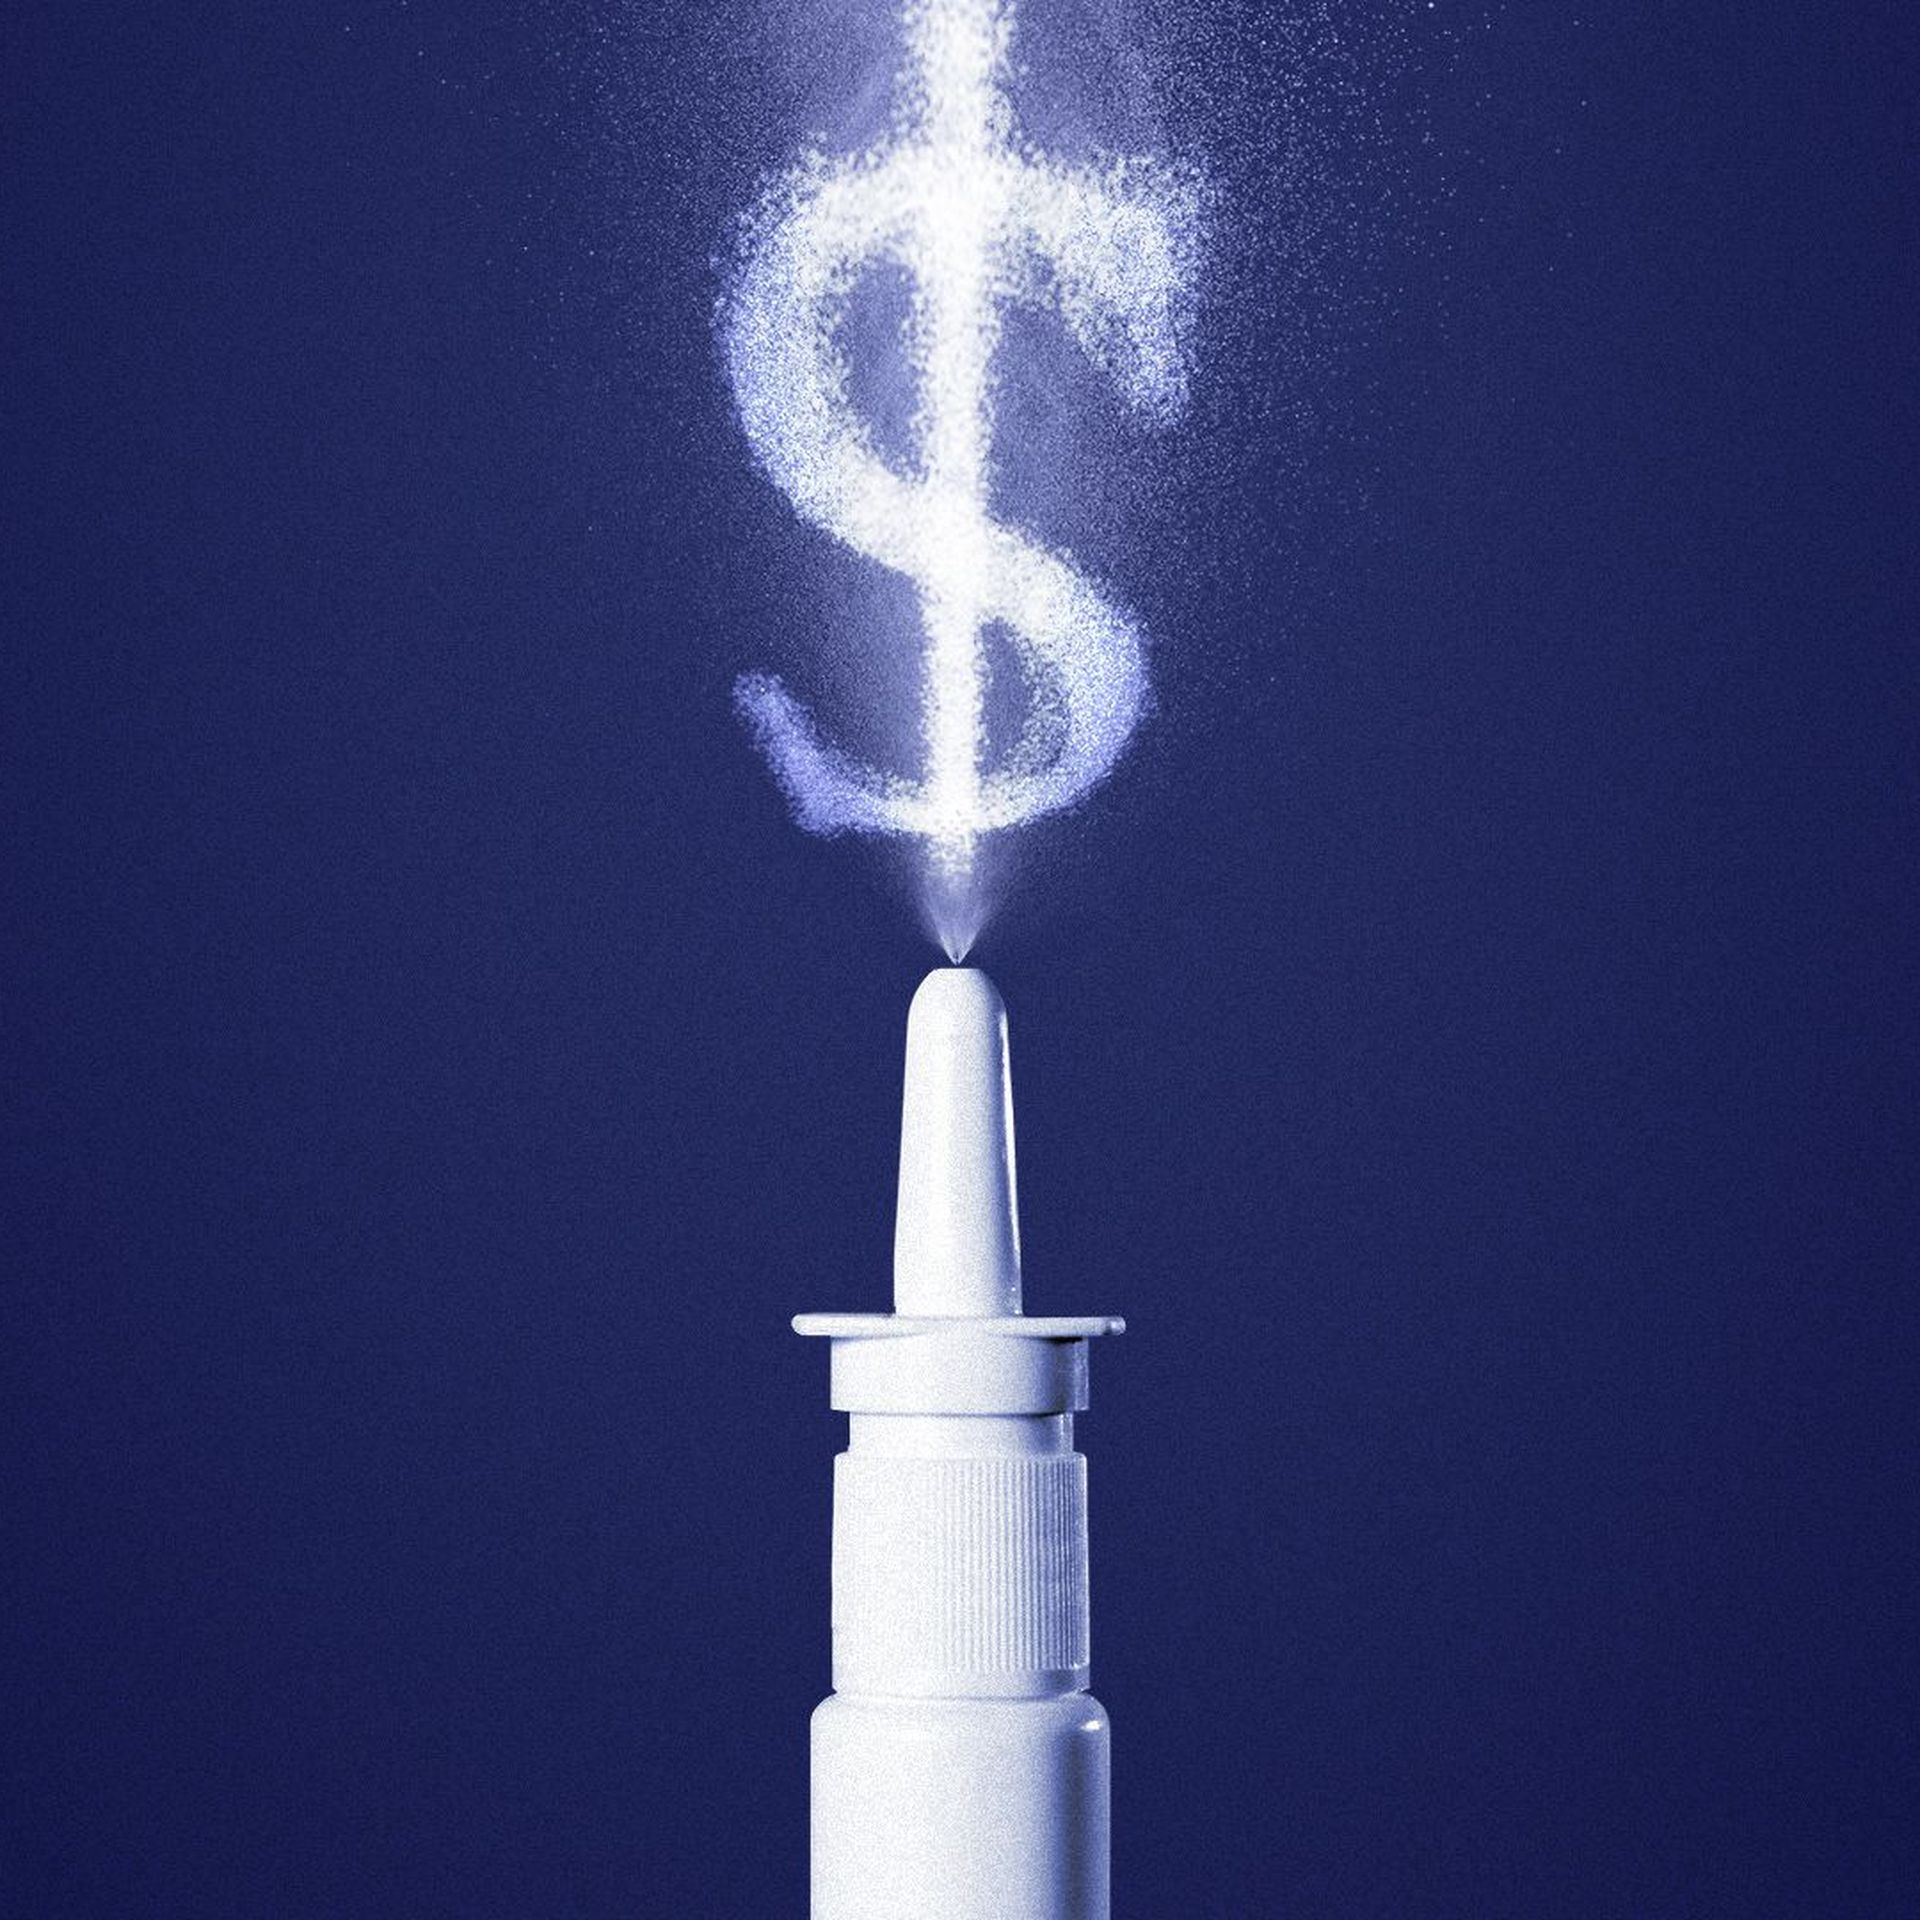 Illustration of a bottle of nasal spray spraying the shape of a dollar sign.